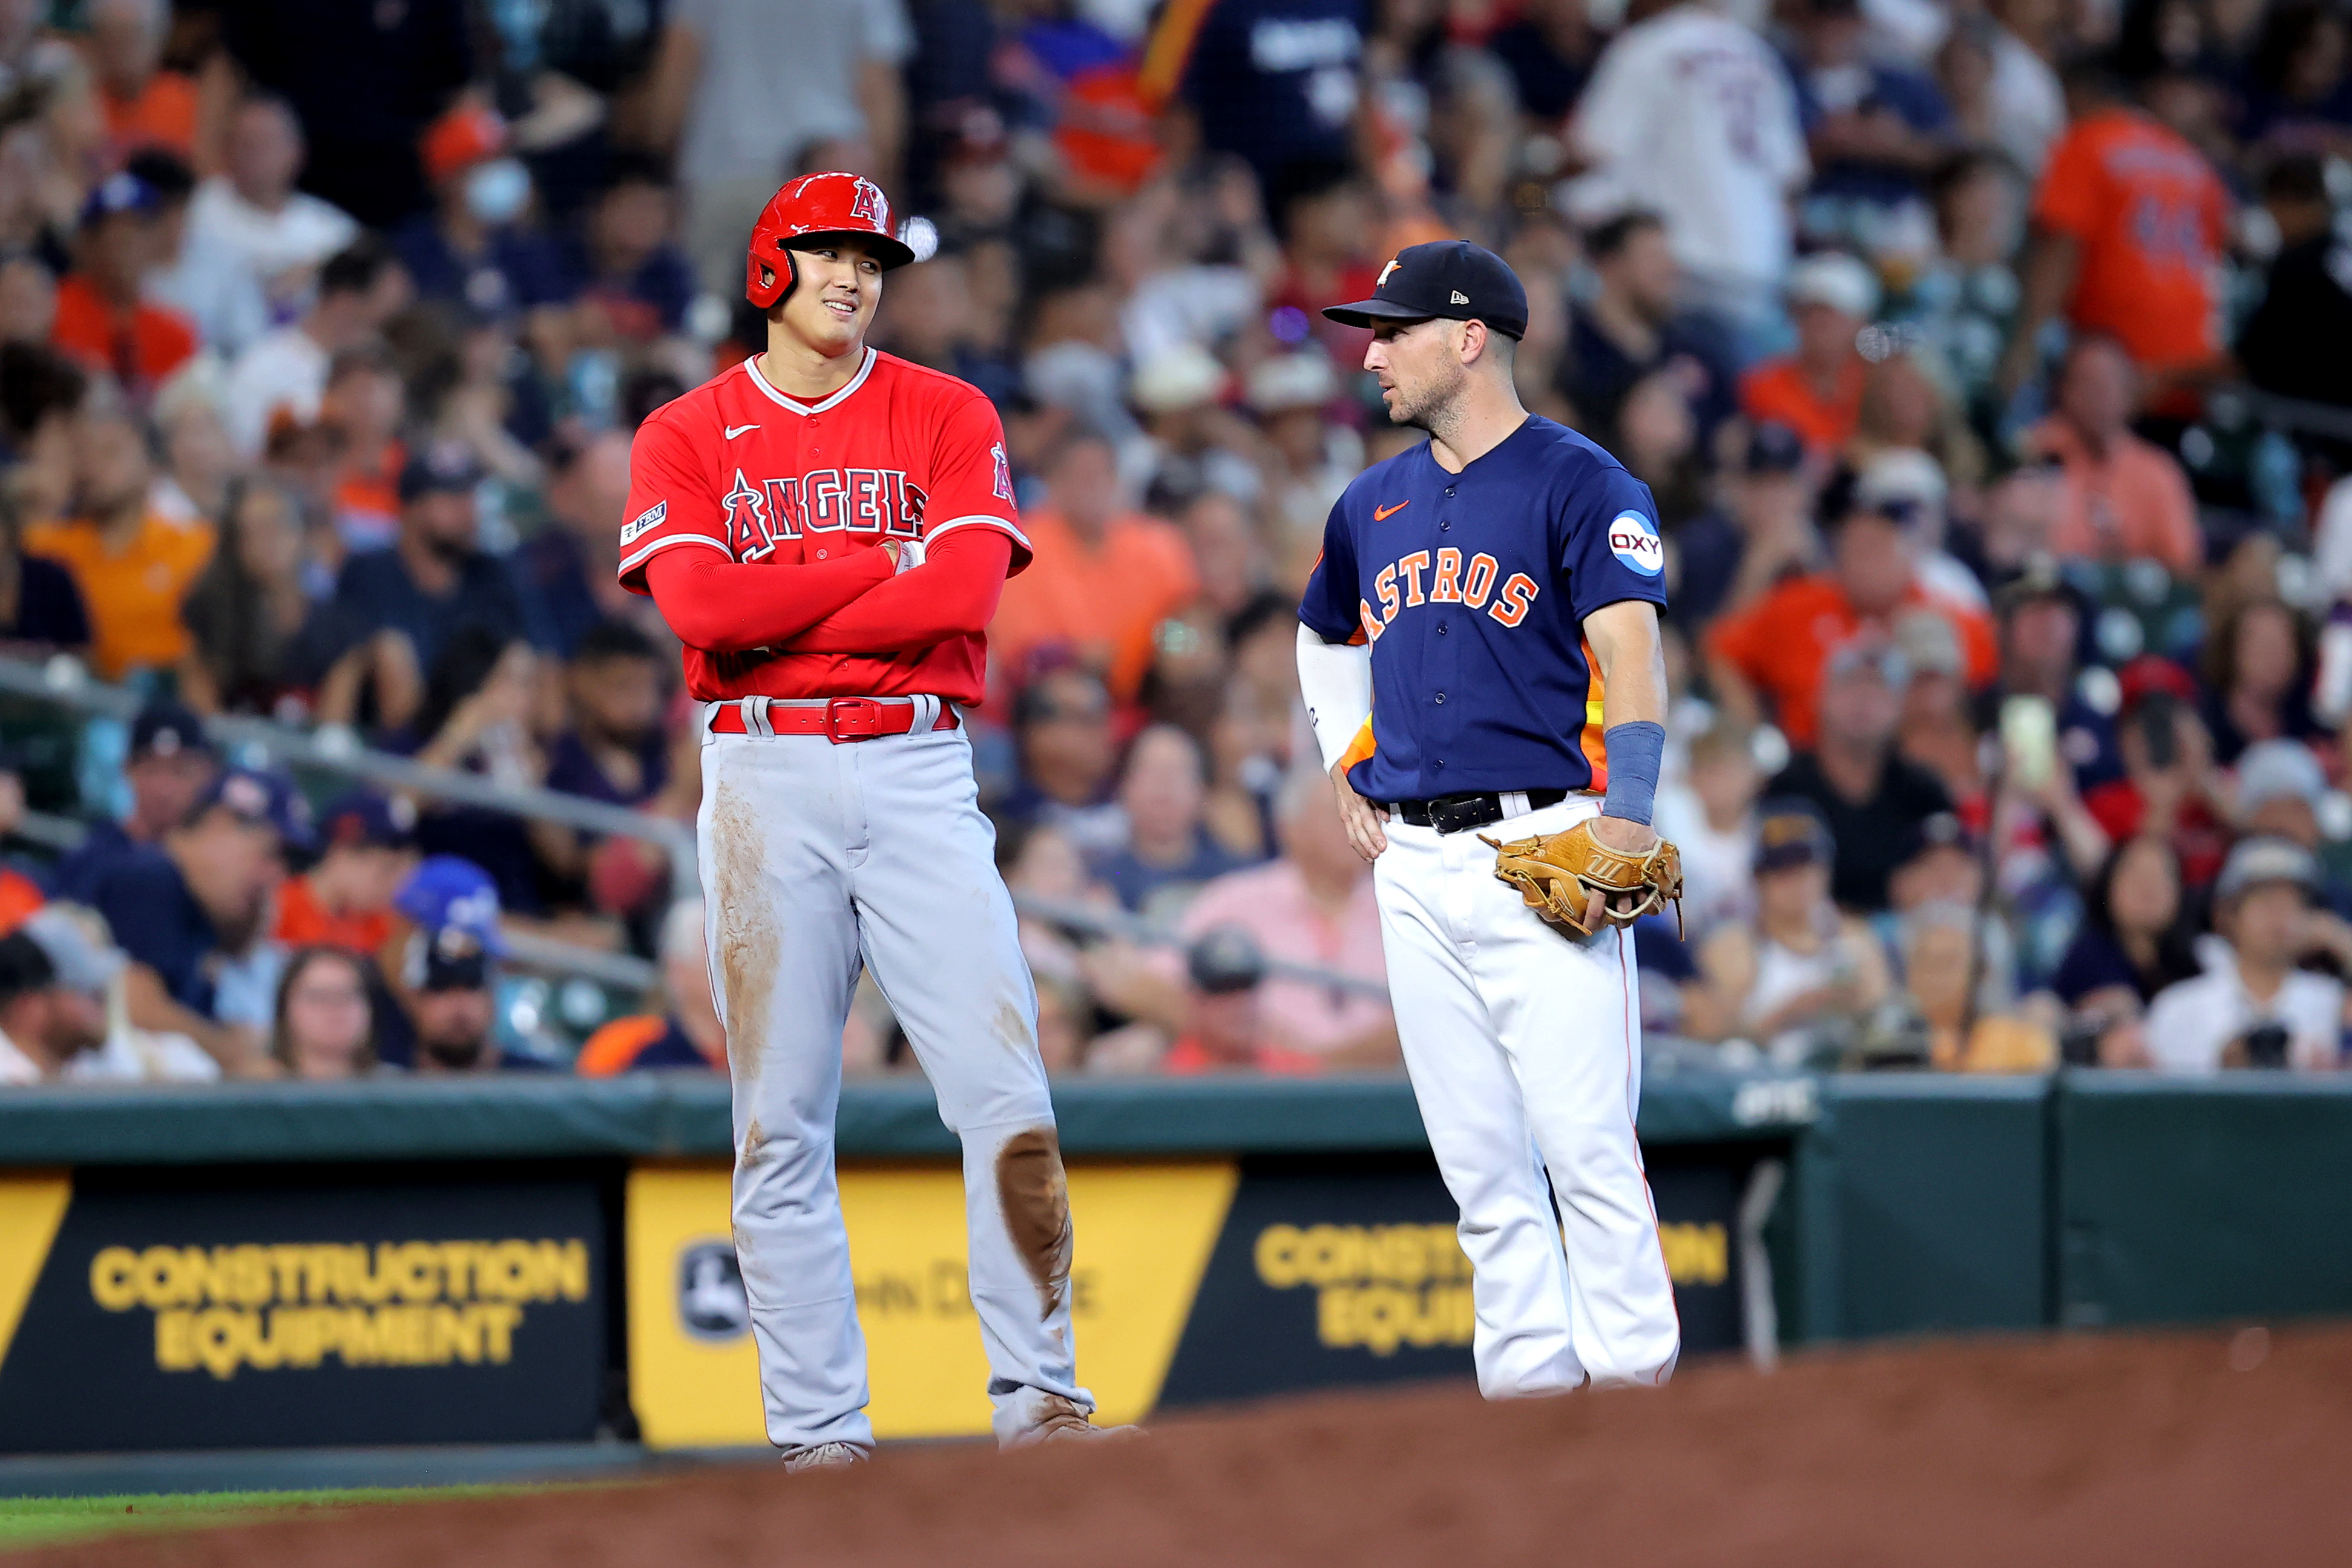 On deck: Astros at Los Angeles Angels